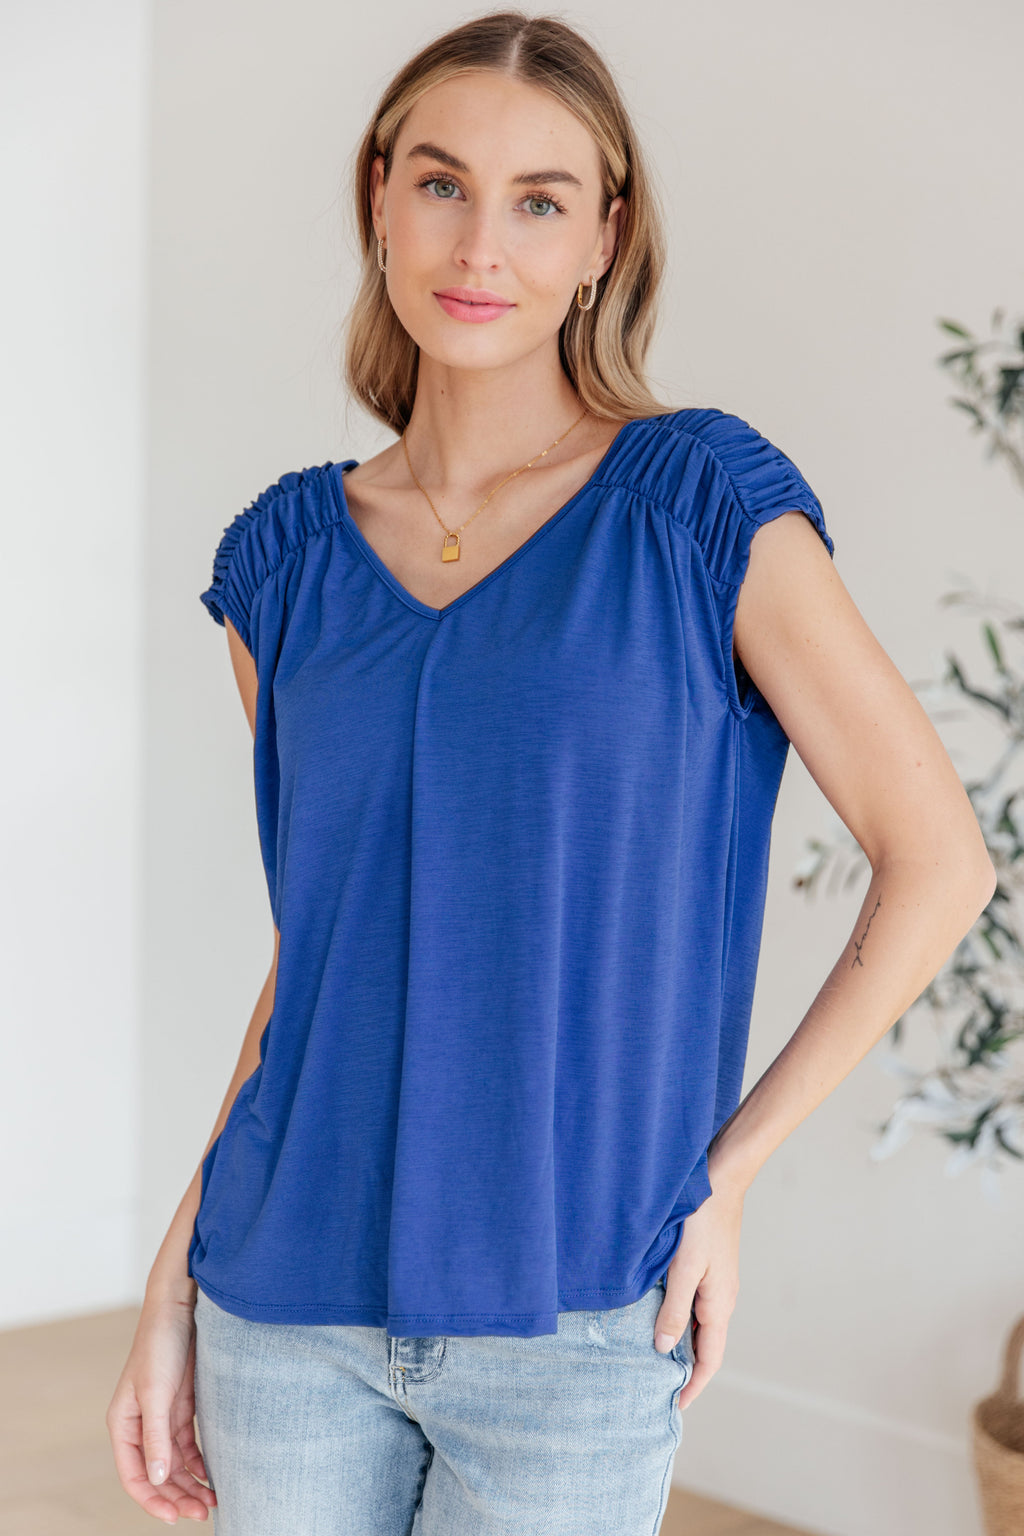 Hazel Blues® |  Ruched Cap Sleeve Top in Royal Blue